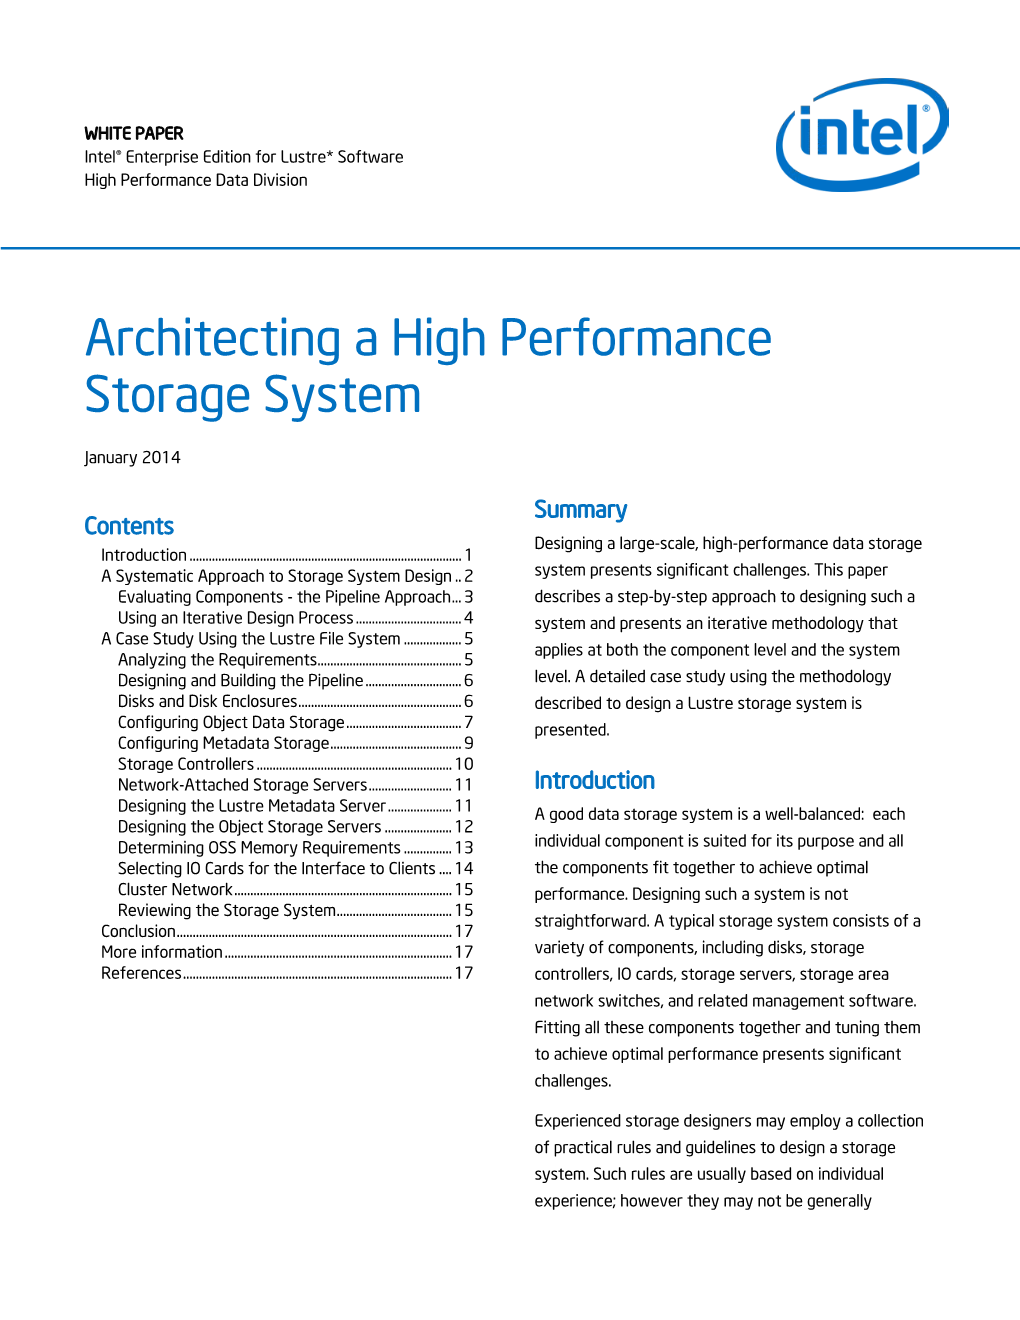 Architecting a High Performance Lustre Storage Solution